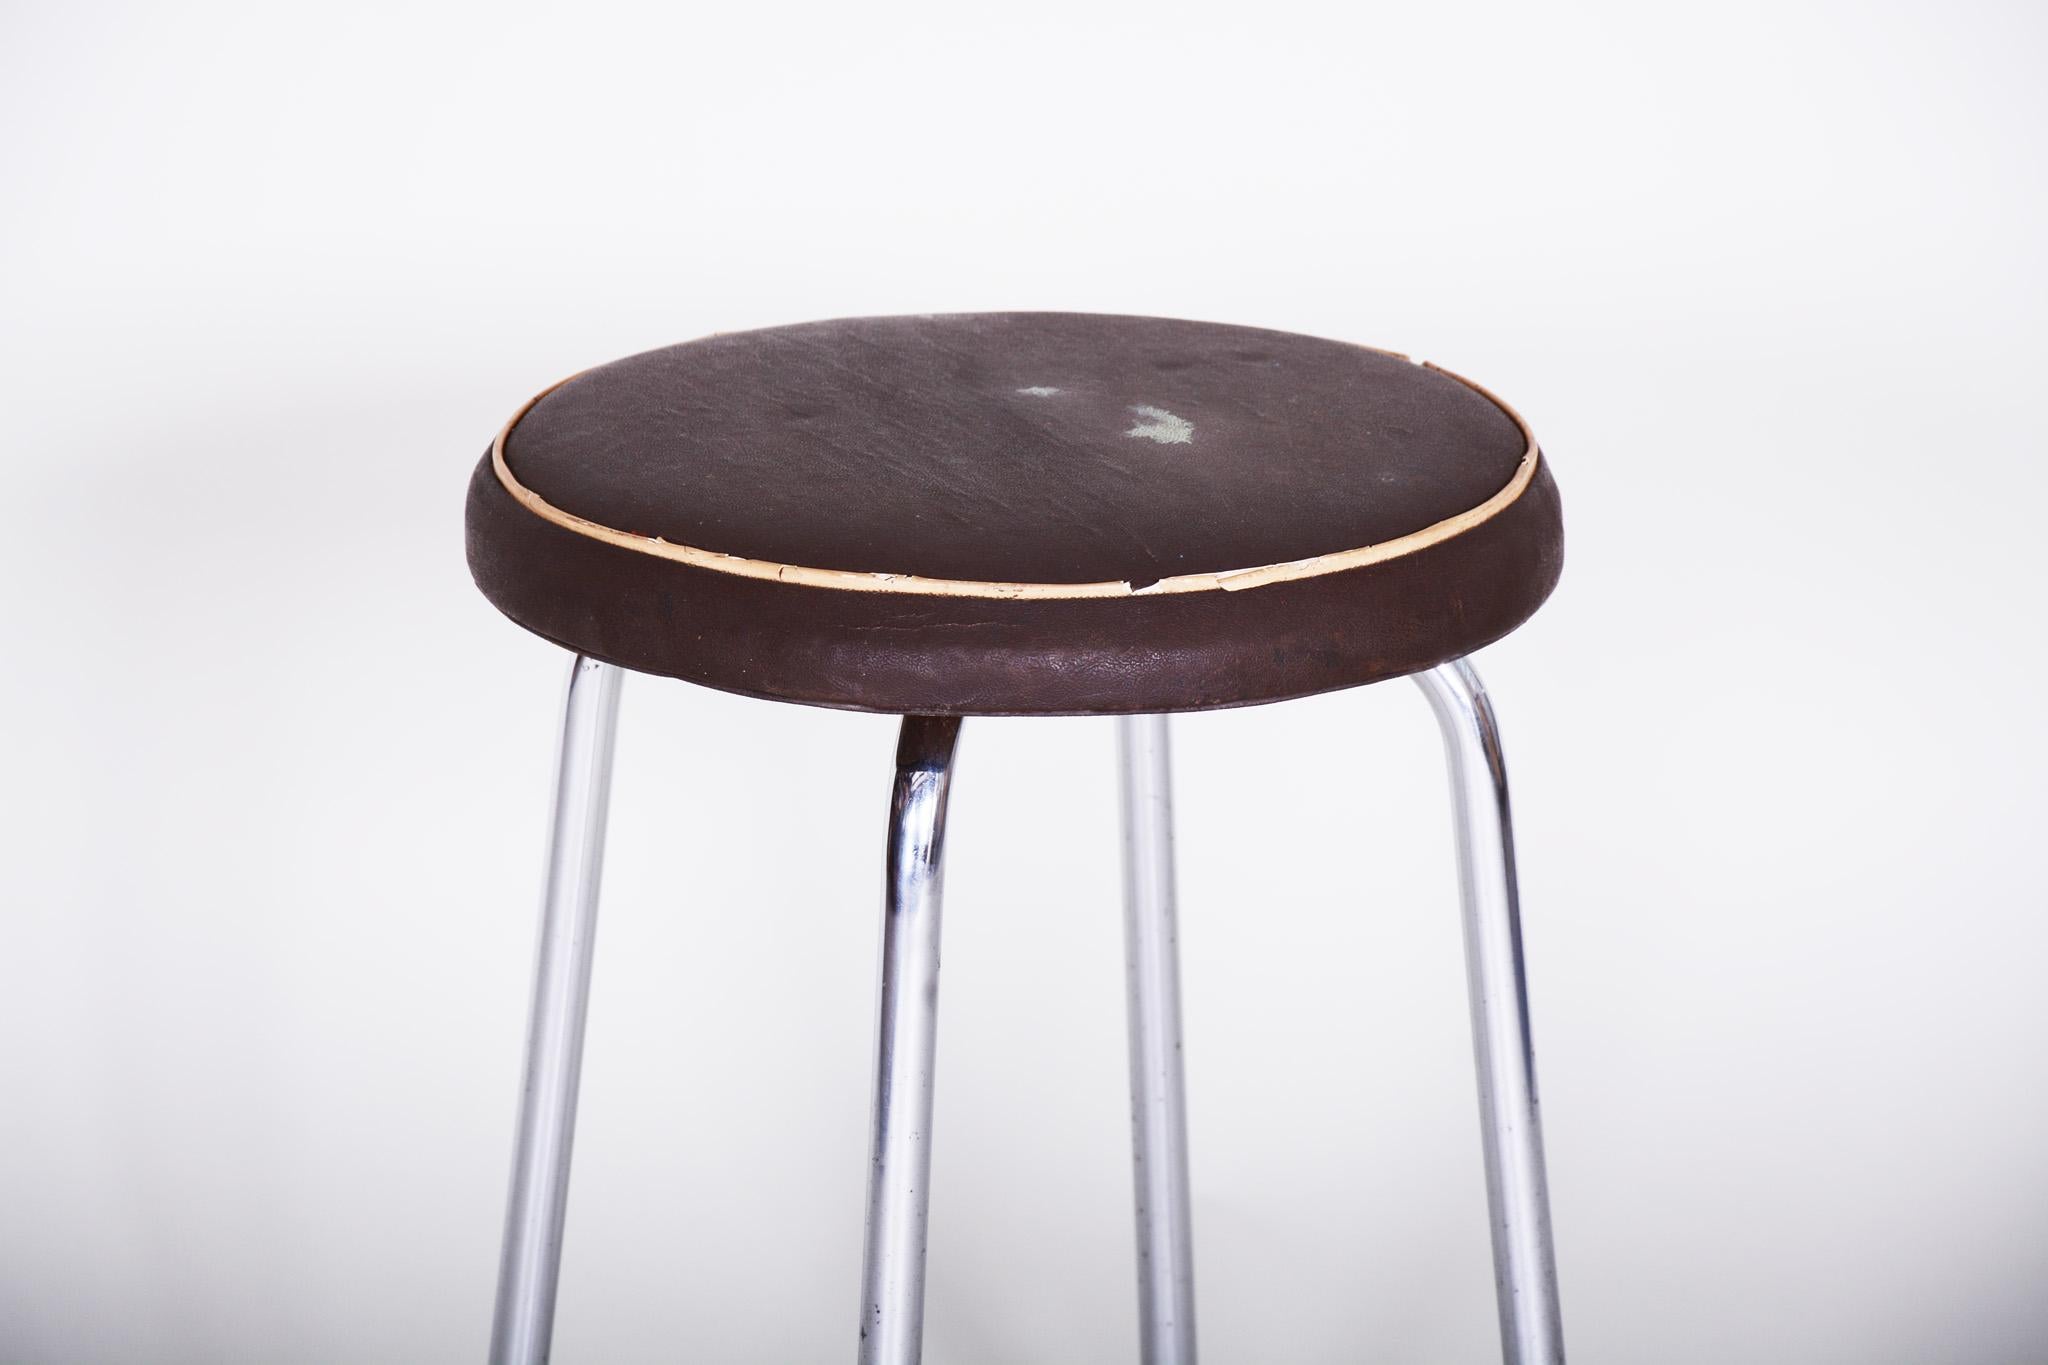 Small Round Bauhaus Chrome Stool by Robert Sezák, Original Leather, 1940s In Fair Condition For Sale In Horomerice, CZ